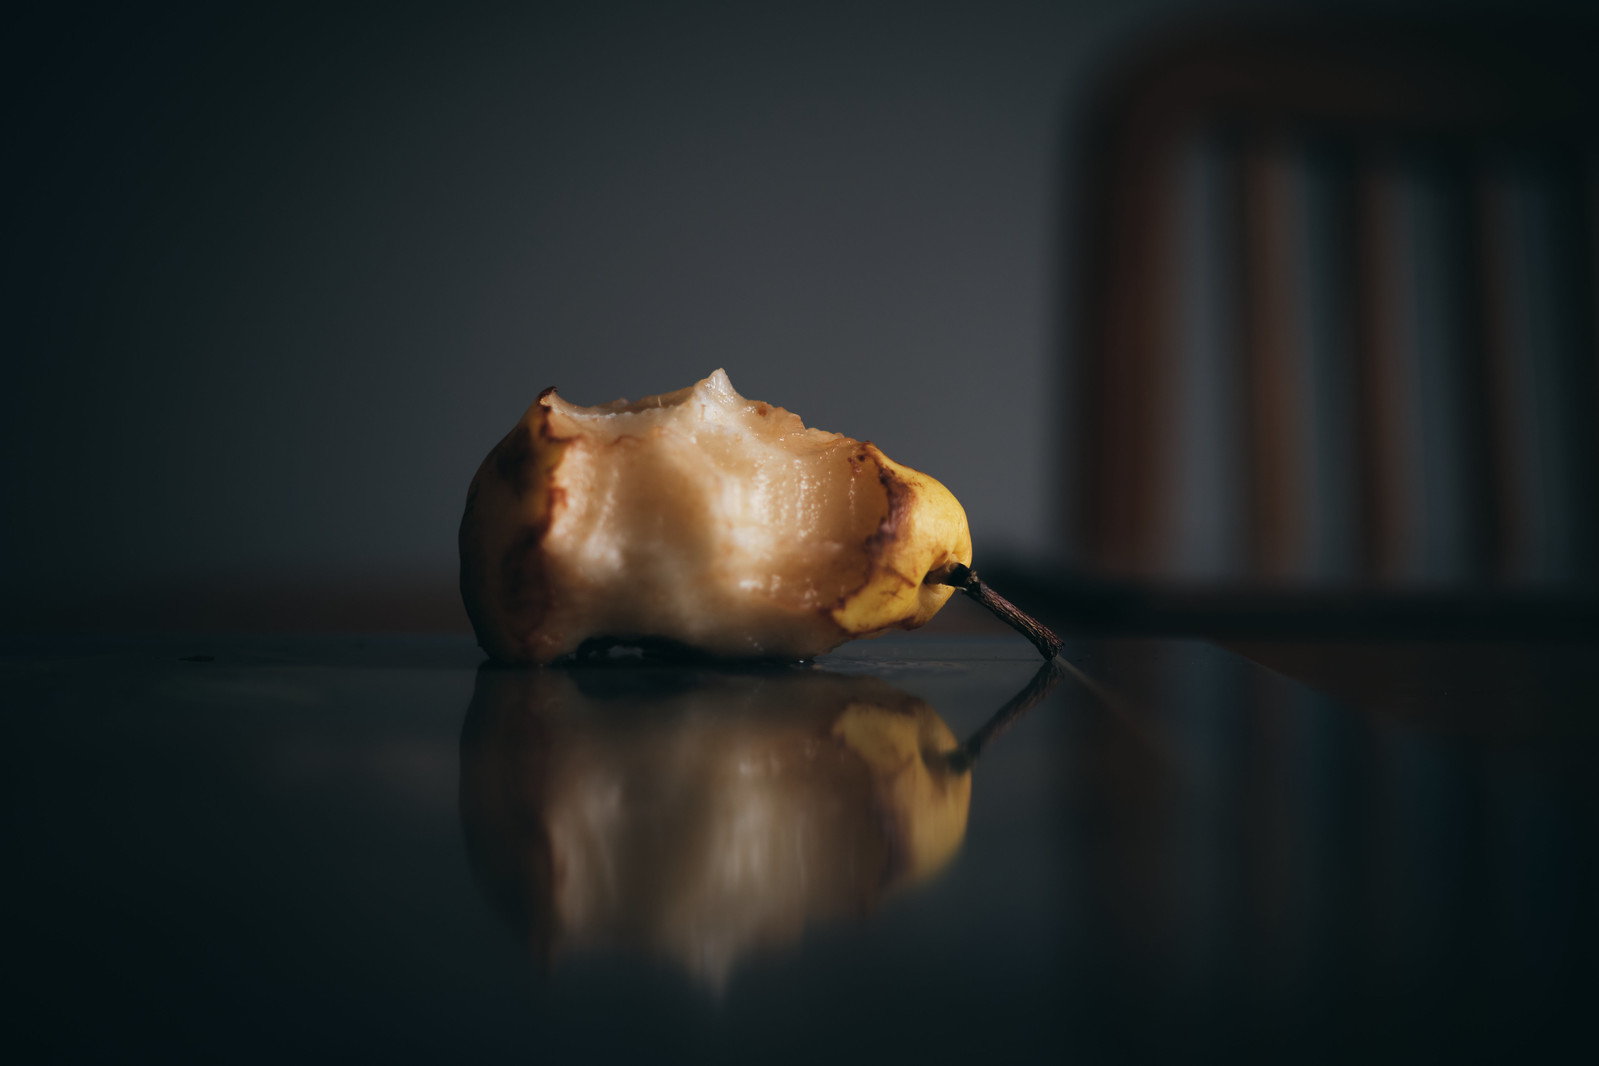 106/365 : The pear